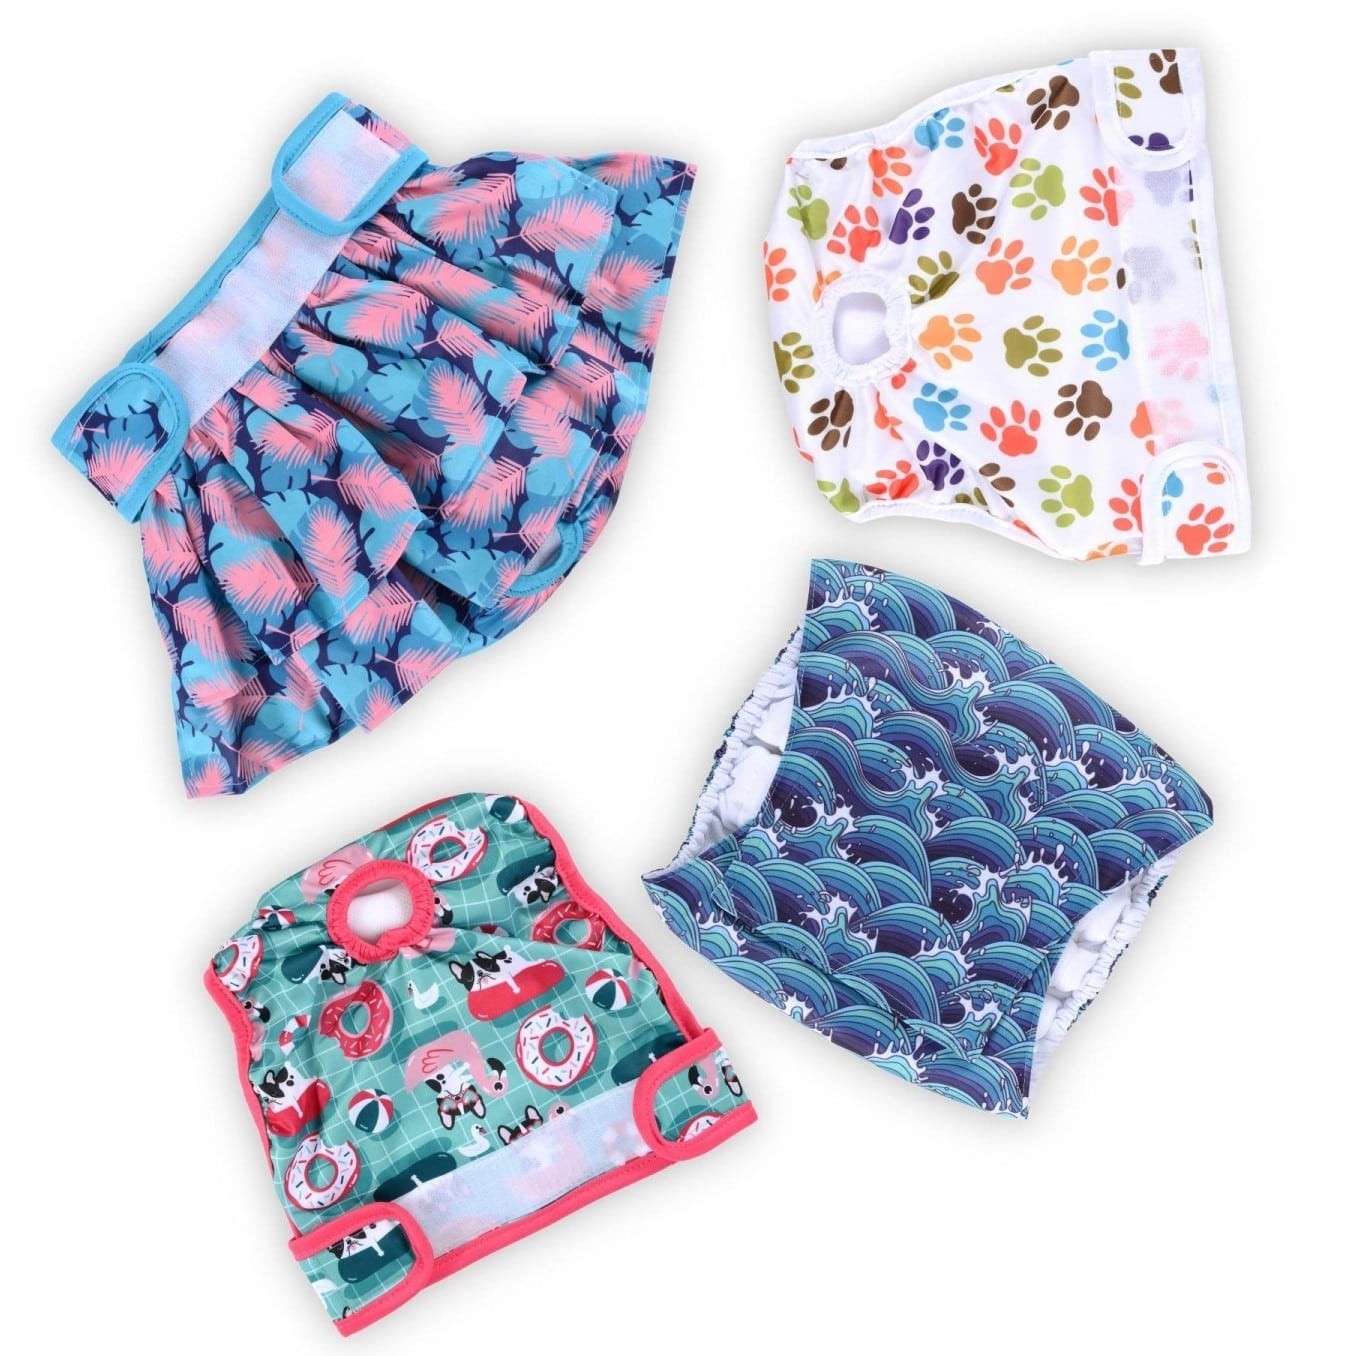 A variety of washable diapers for dogs laid out on a white surface